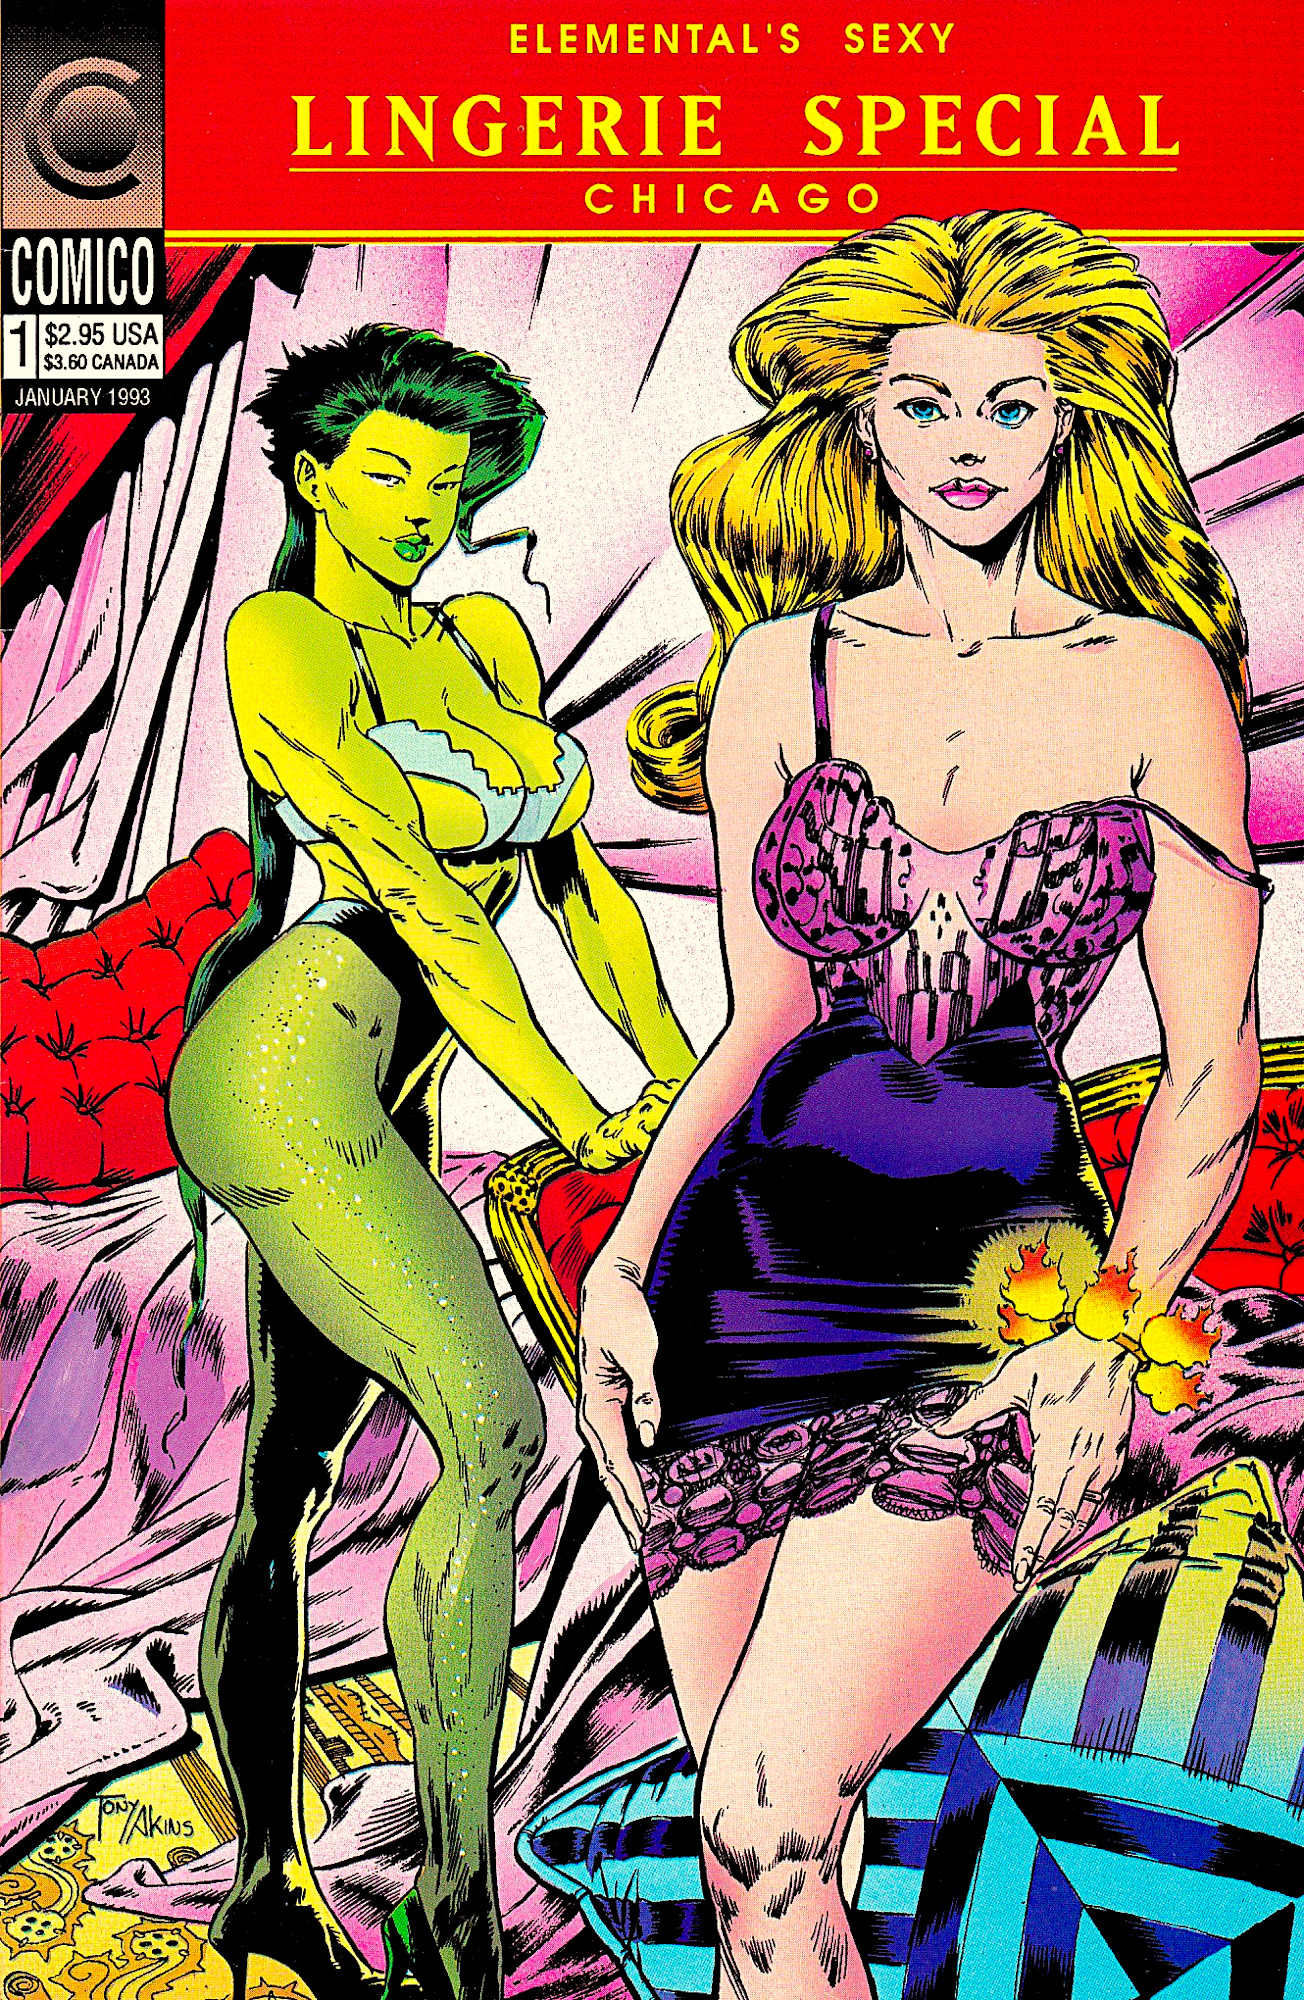 Elementals Sexy Lingerie Special Vol 1 1, Comic Book Network Wiki